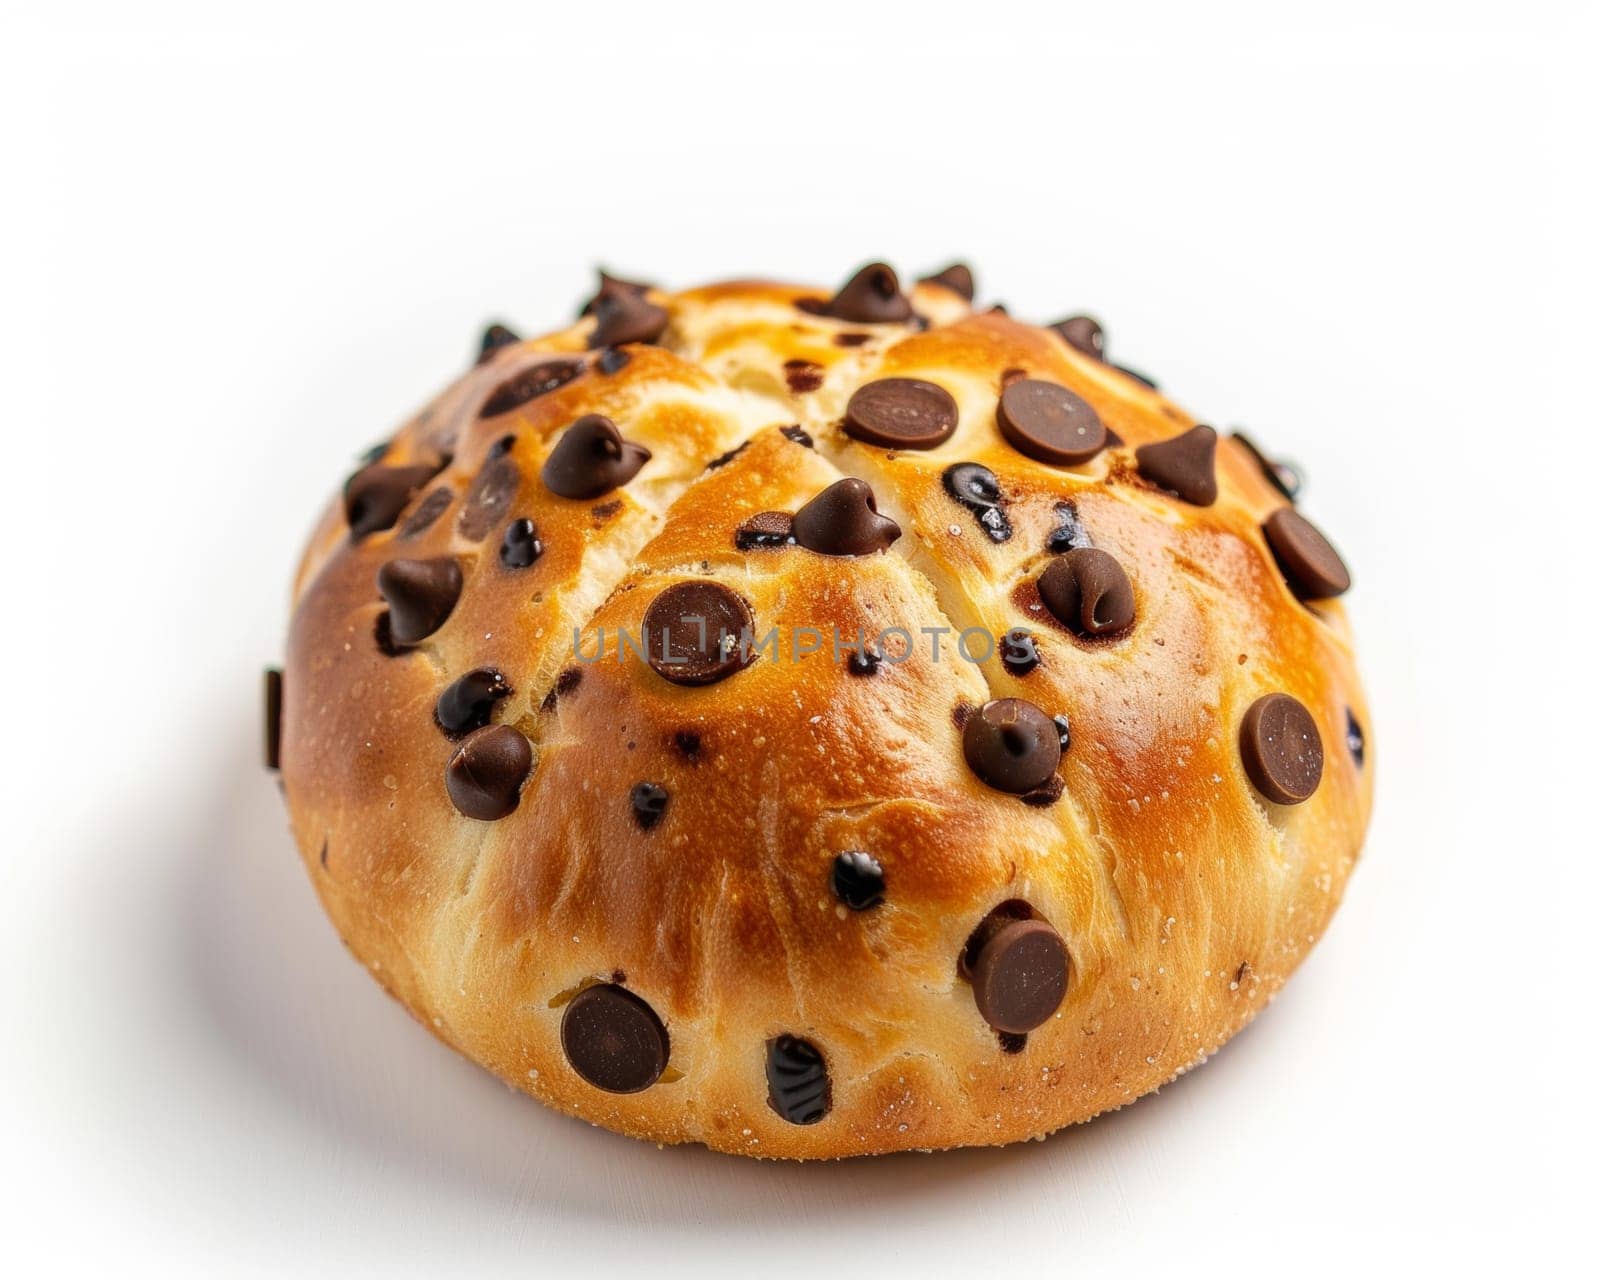 Round brioche bread with chocolate chips isolated on white background by papatonic